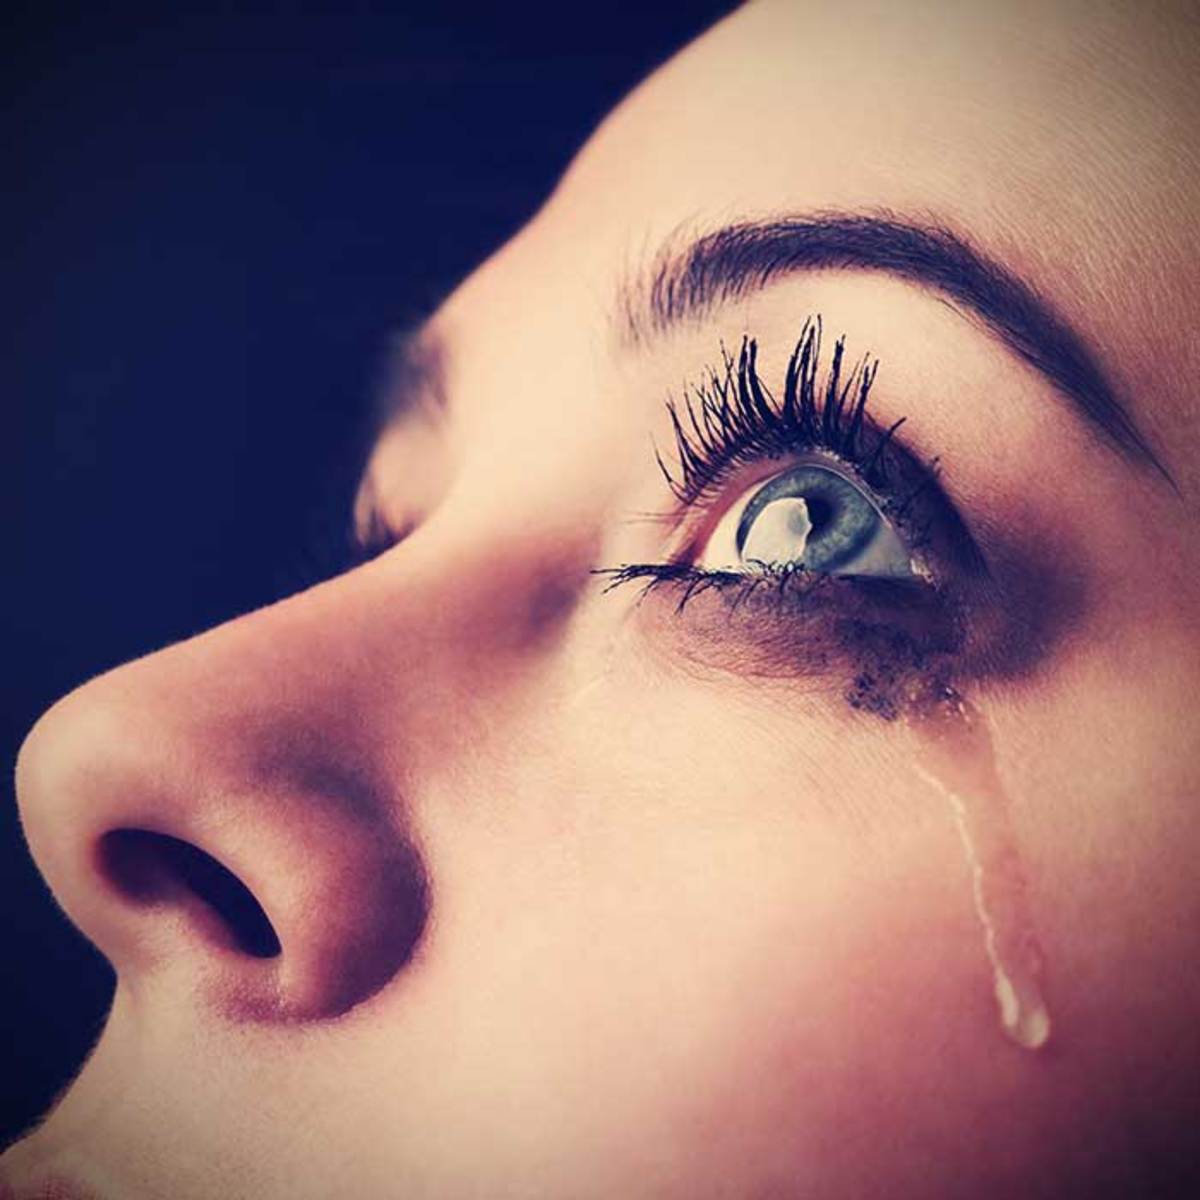 10-signs-of-depression-in-women